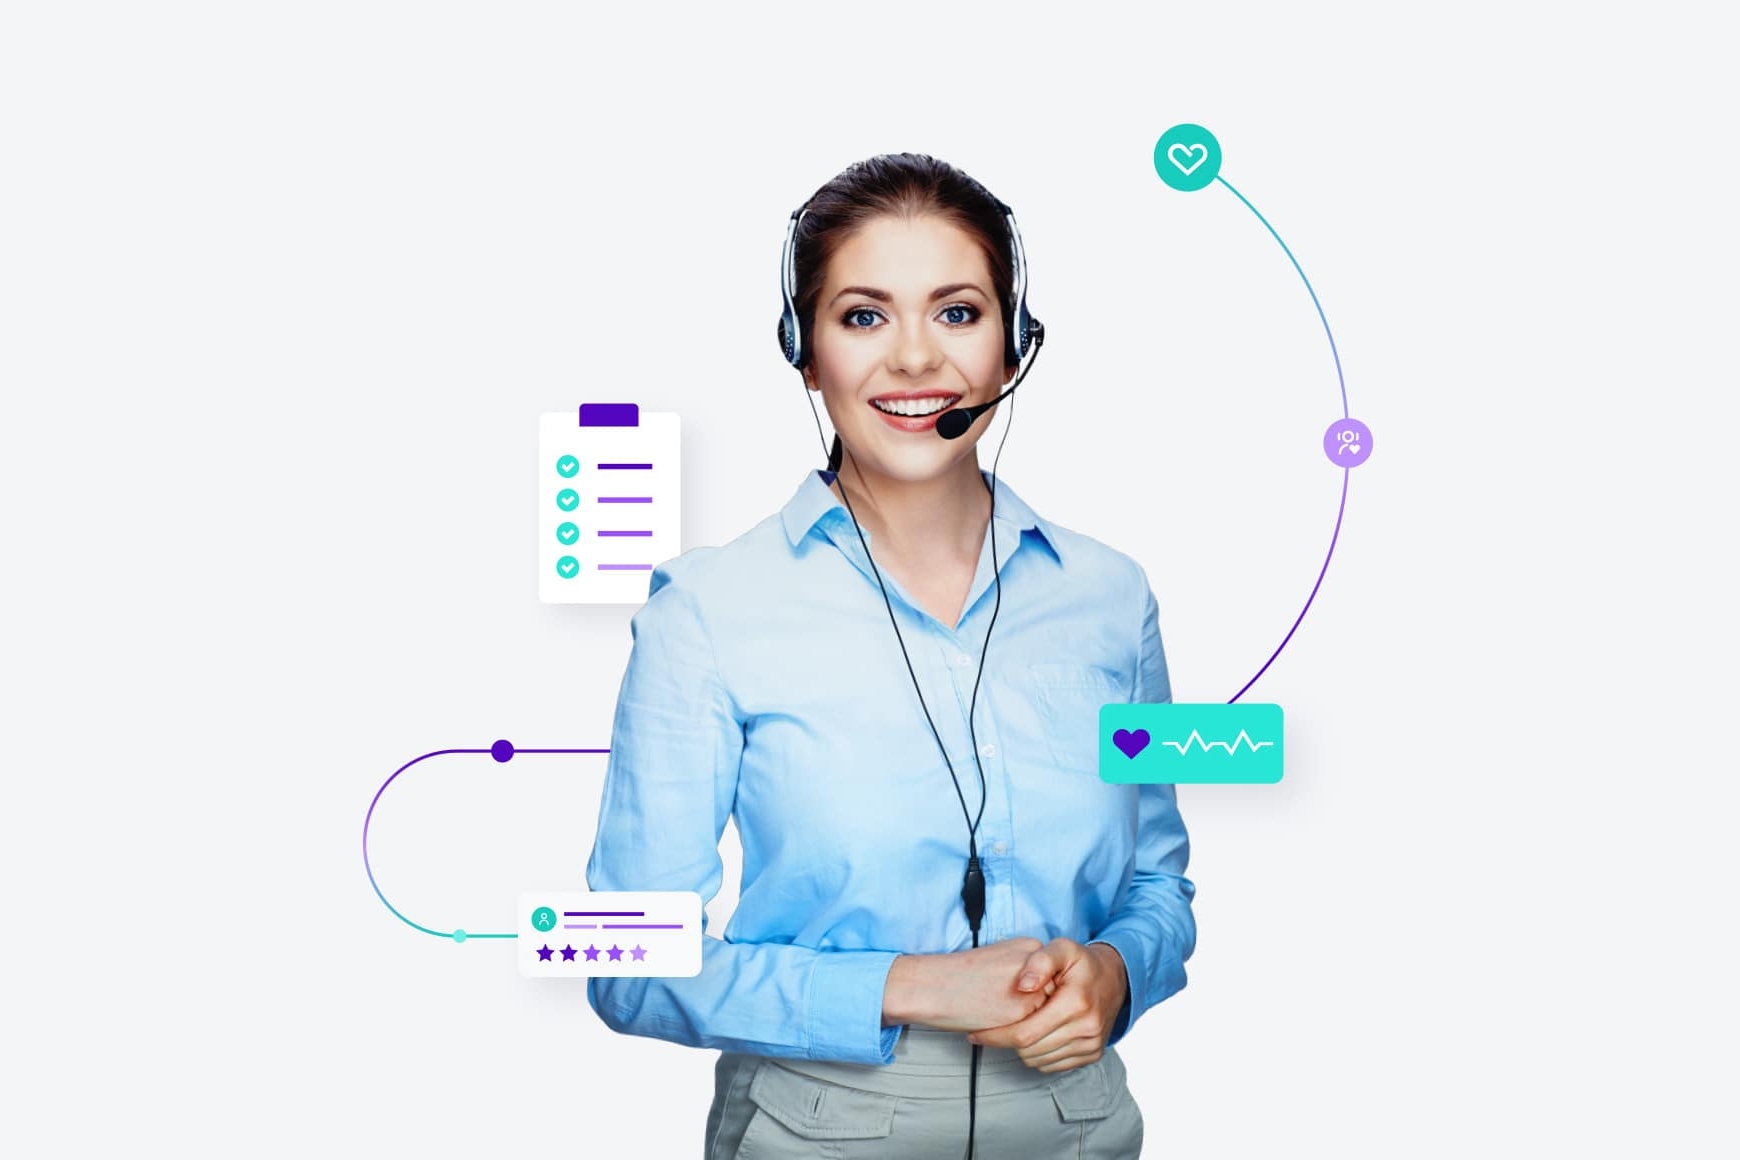 Employee Empowerment In A Healthcare Contact Center